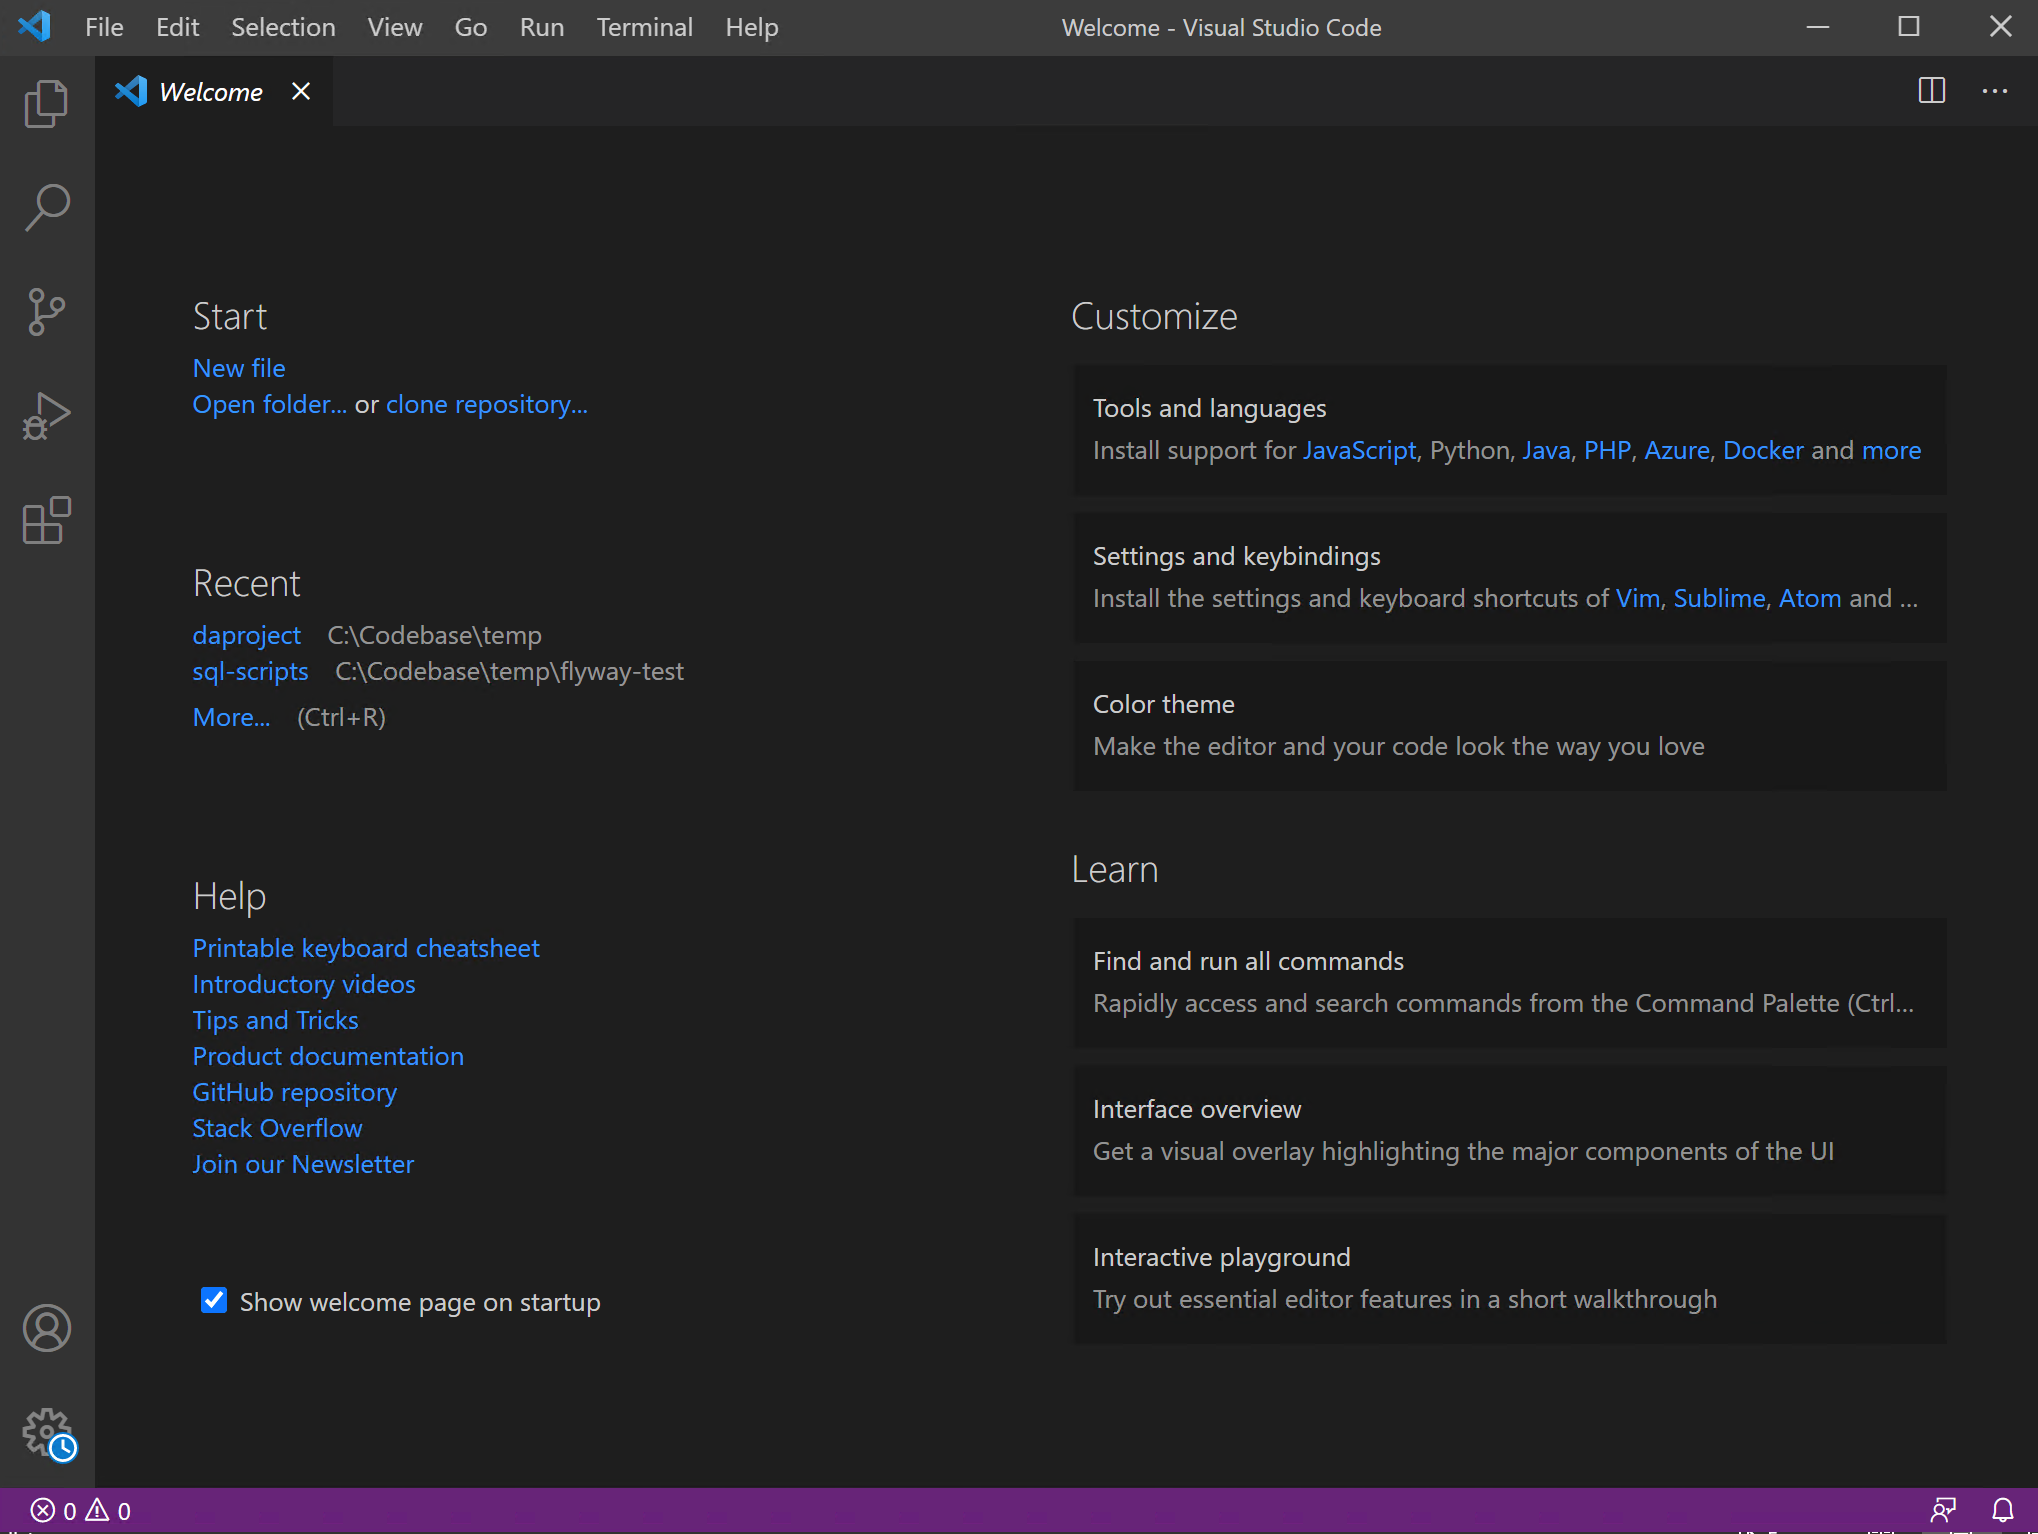 Installed Visual Studio Code to efficiently write Python scripts